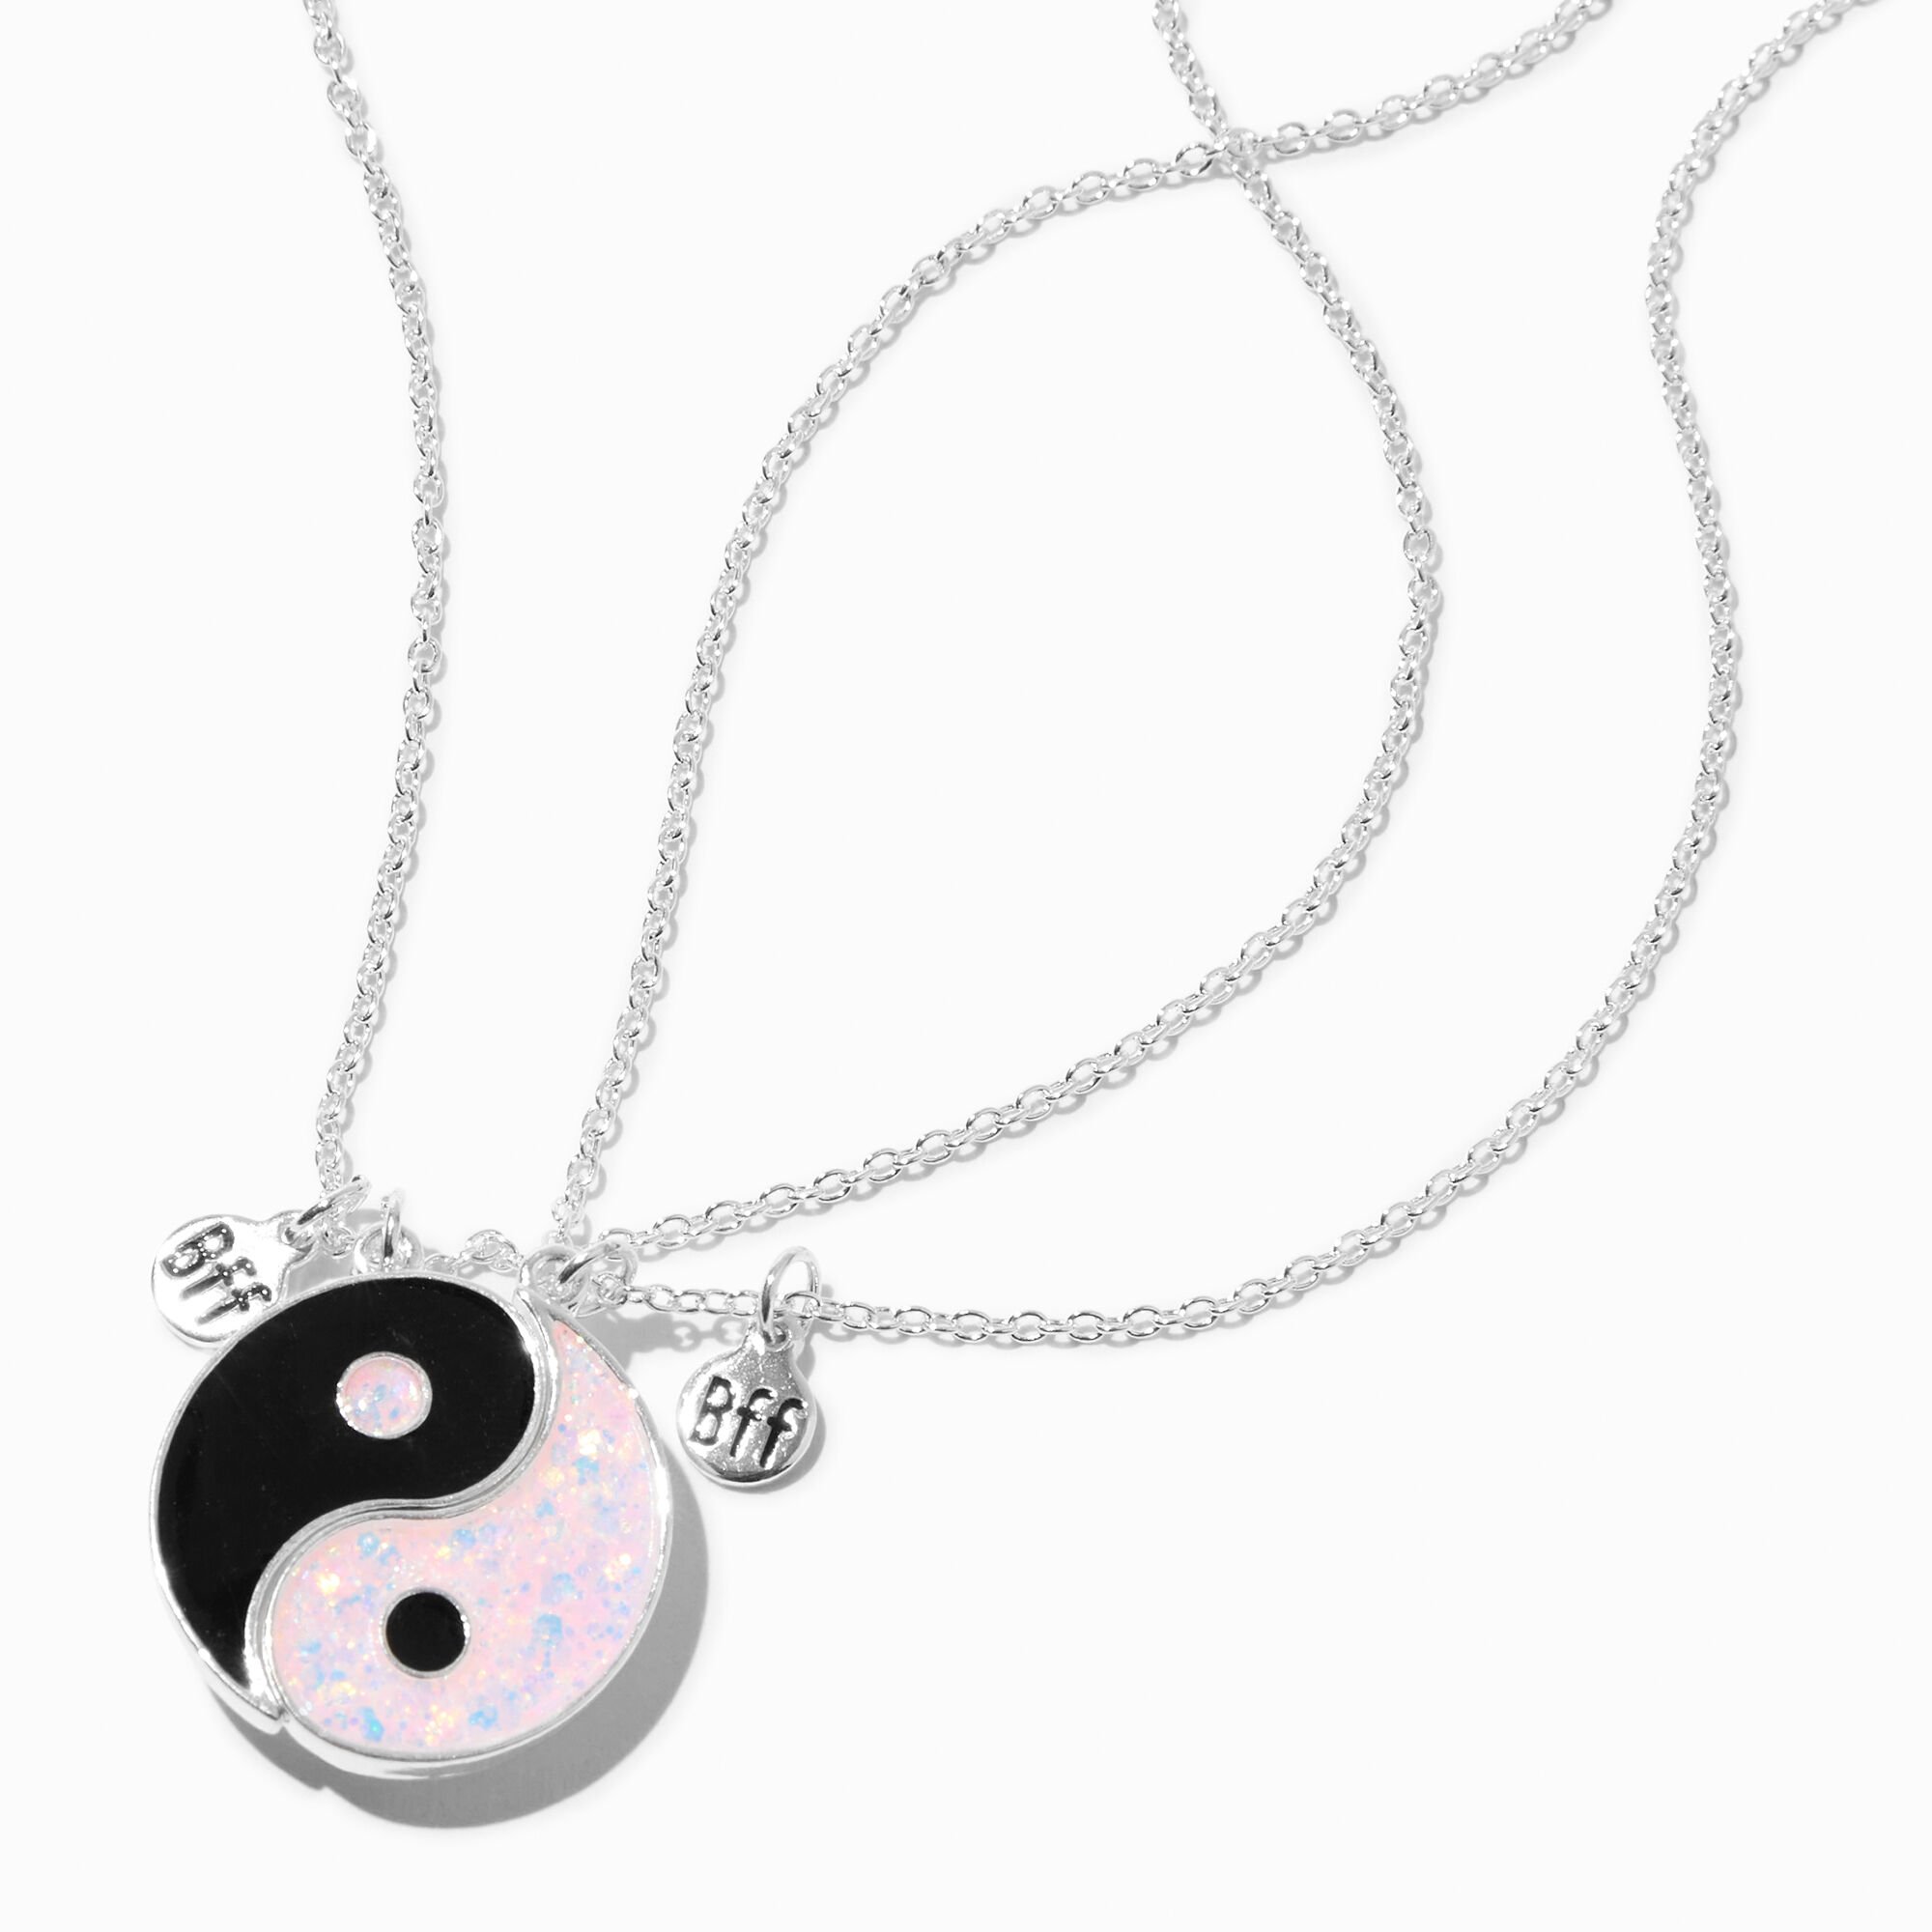 View Claires Best Friends Yin Yang Uv ColorChanging Pendant Necklaces 2 Pack Silver information